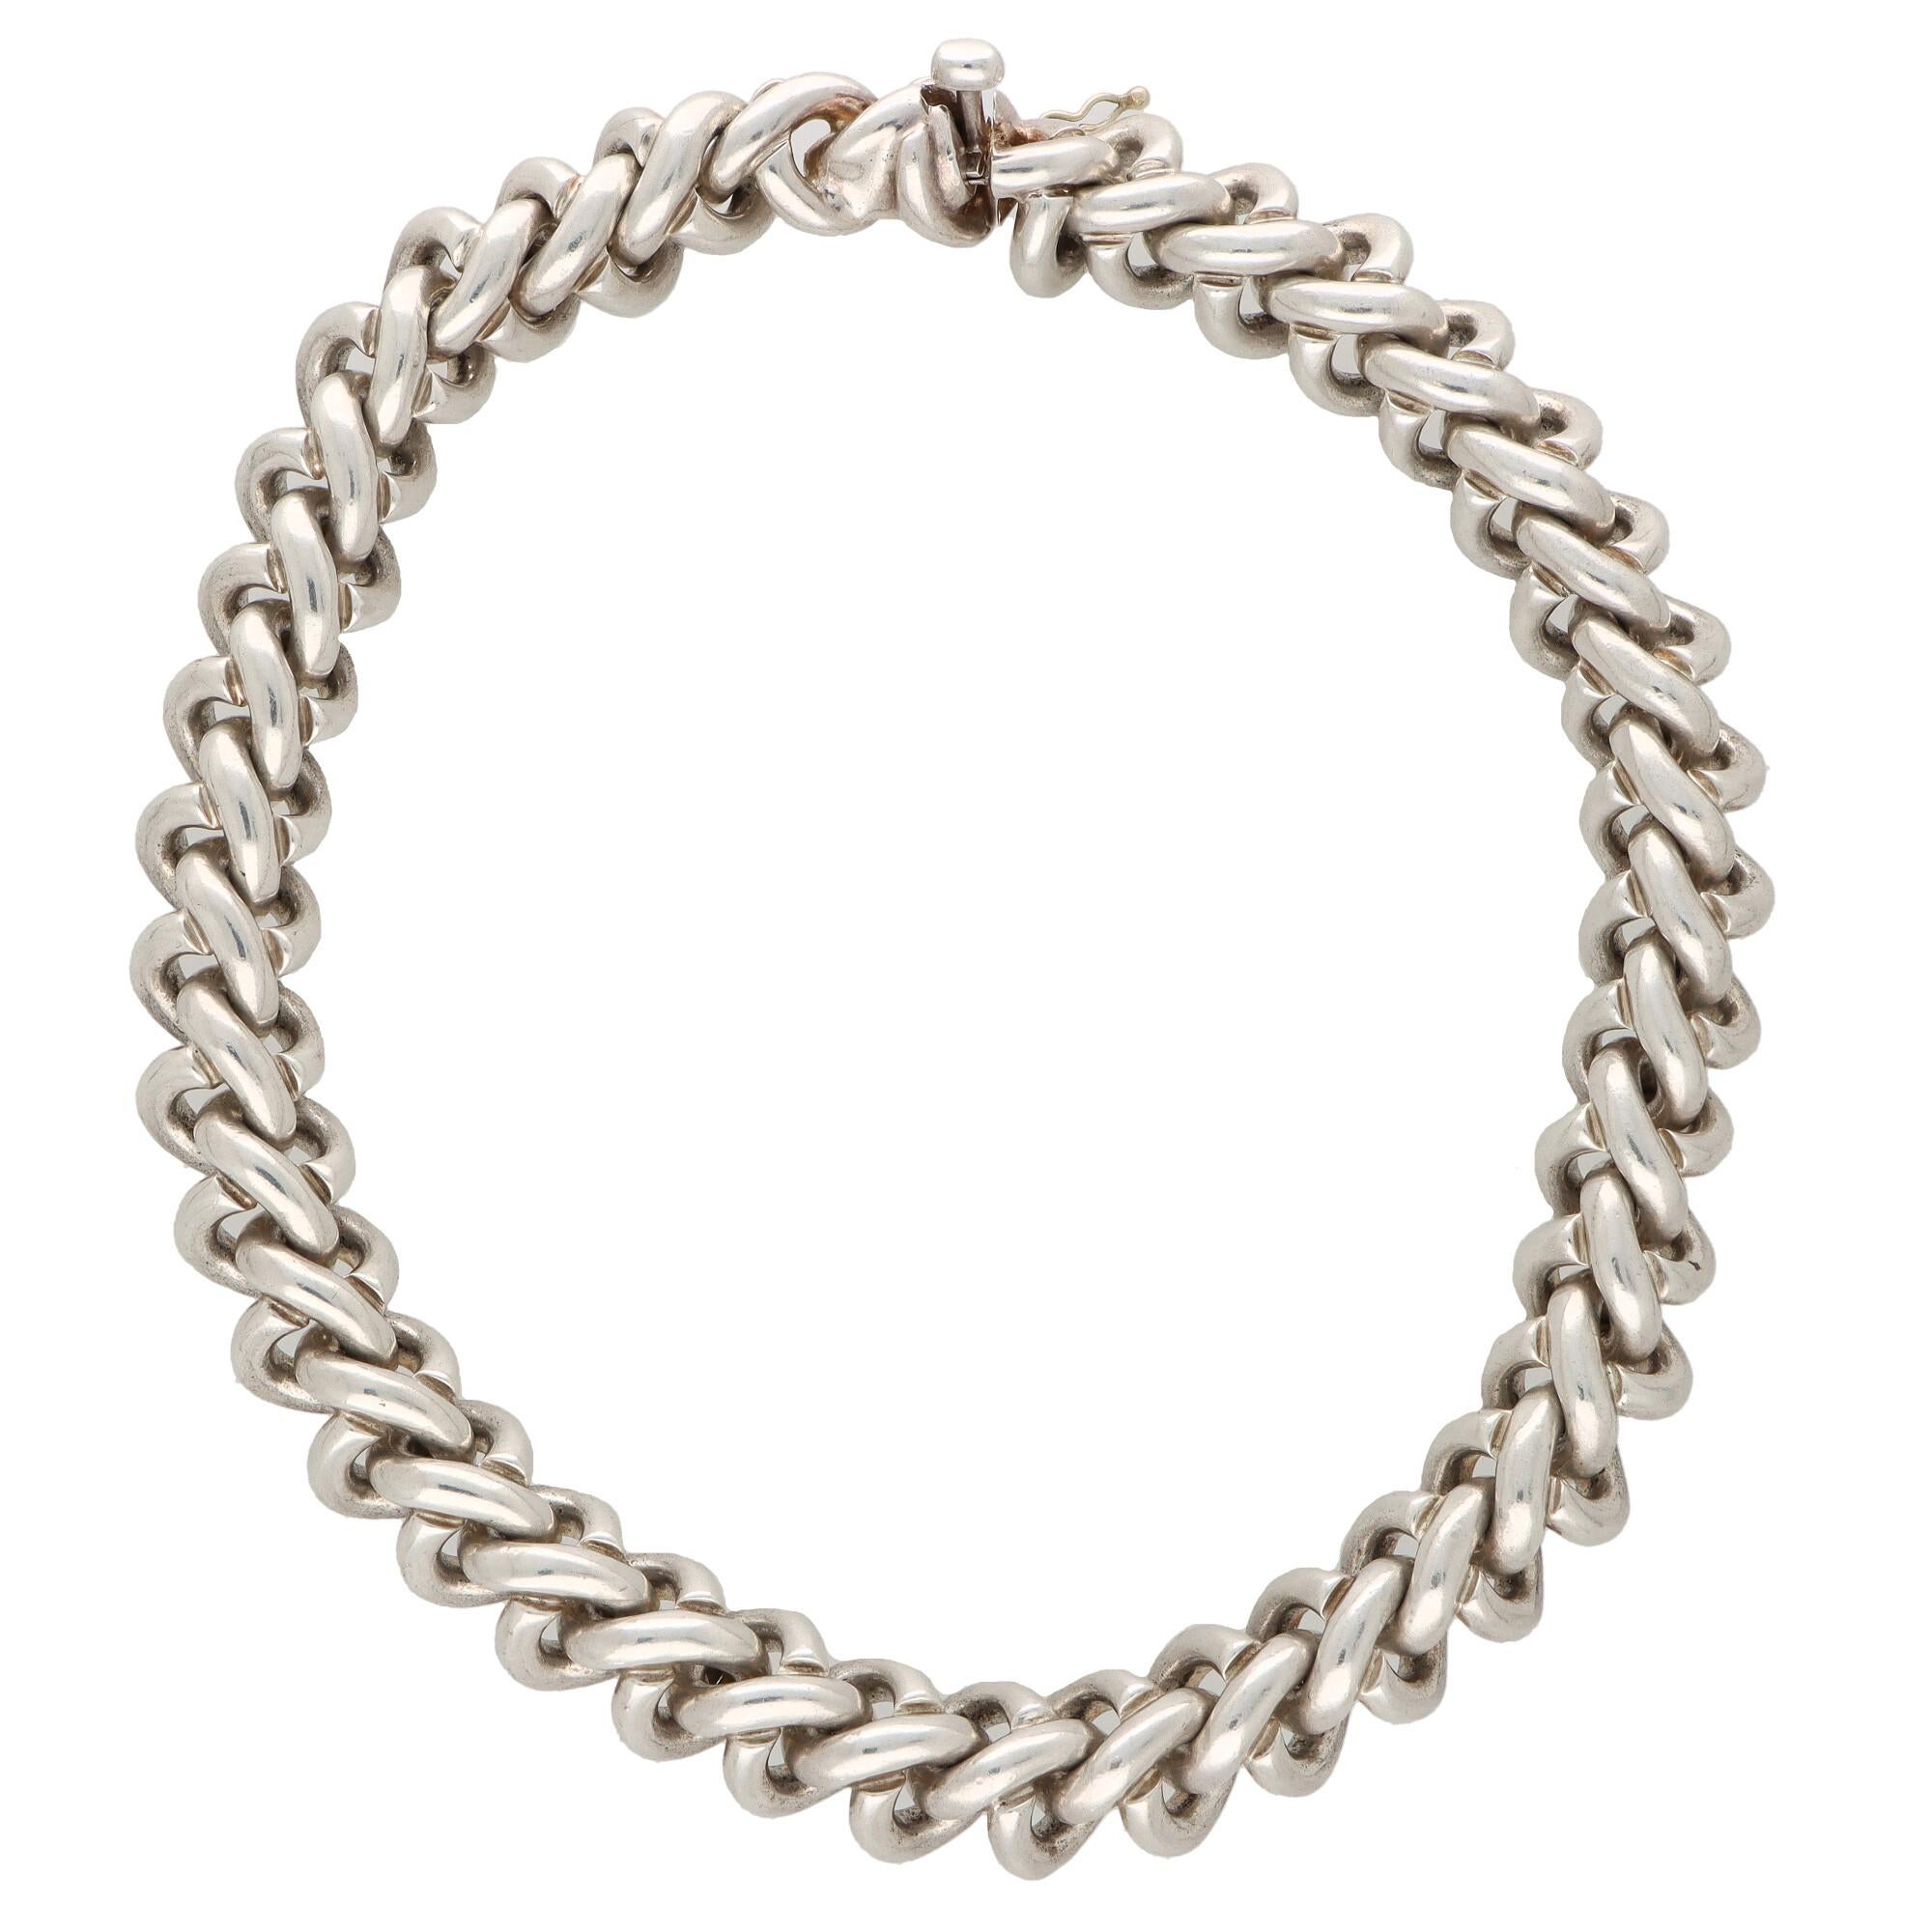 A rather interesting vintage chunky choker chain necklace set in solid silver. 

The necklace is composed of 38 solid silver links and sits beautifully once on the neck. Due to the design of the necklace it could easily be worn by itself as a